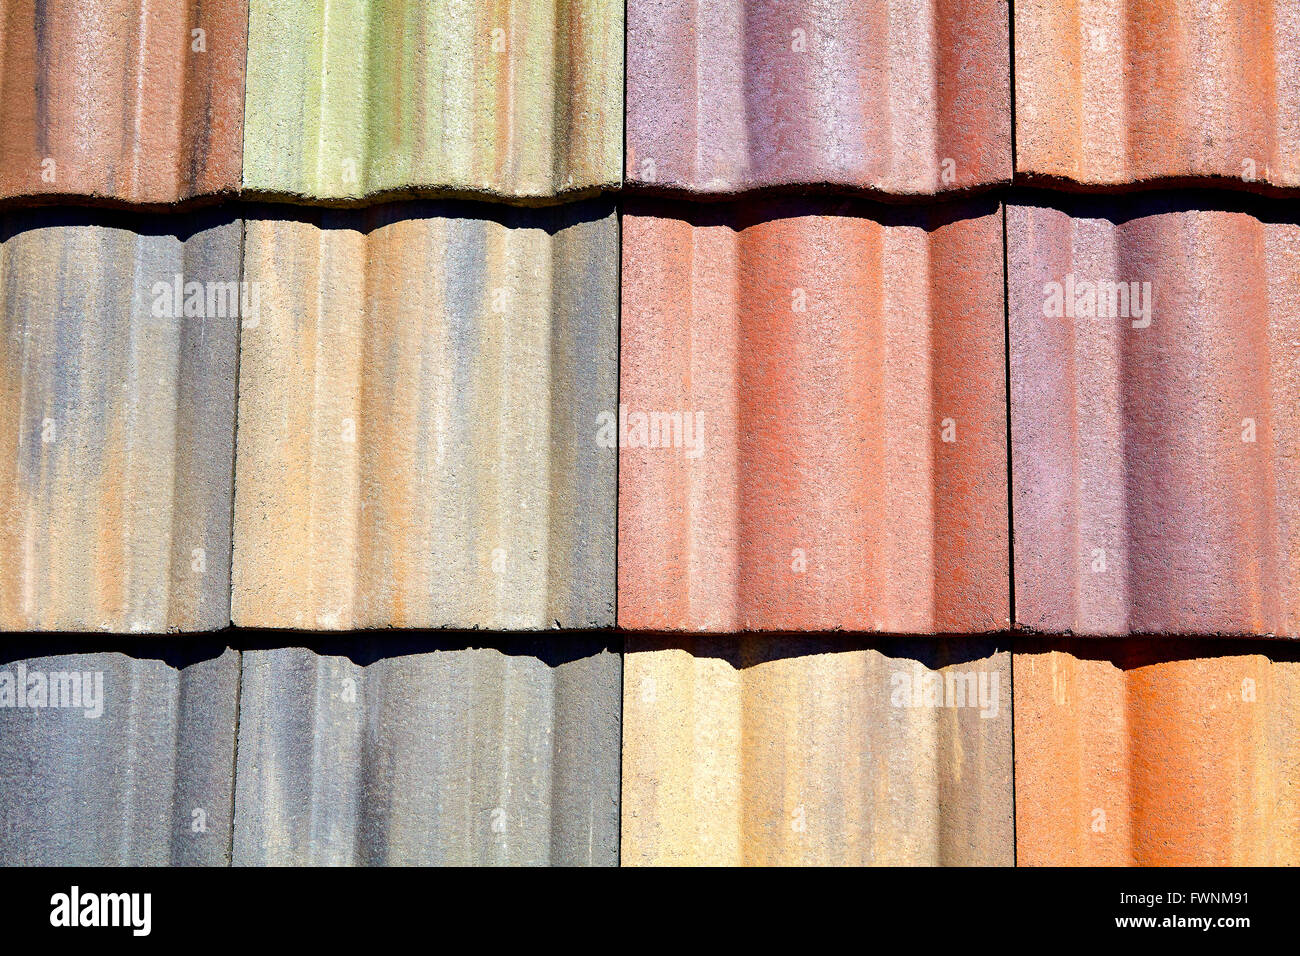 concrete roofing tiles in sample colors and patterns, tile, home, homebuilding, manufacturing, building, industry, building indu Stock Photo